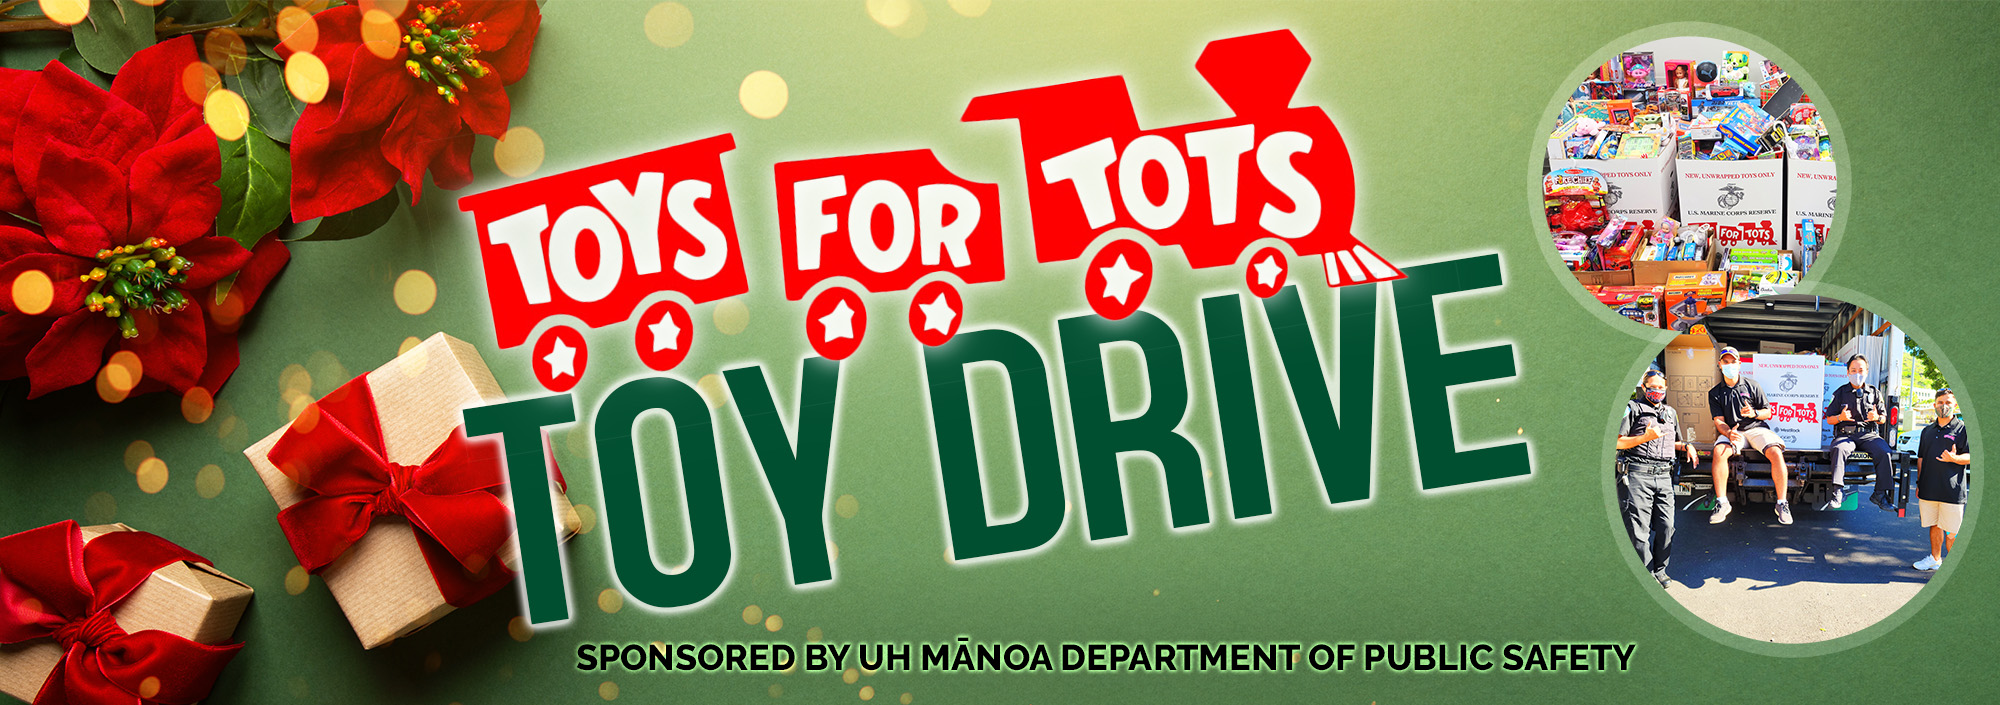 Toys For Tots Department Of Public Safety